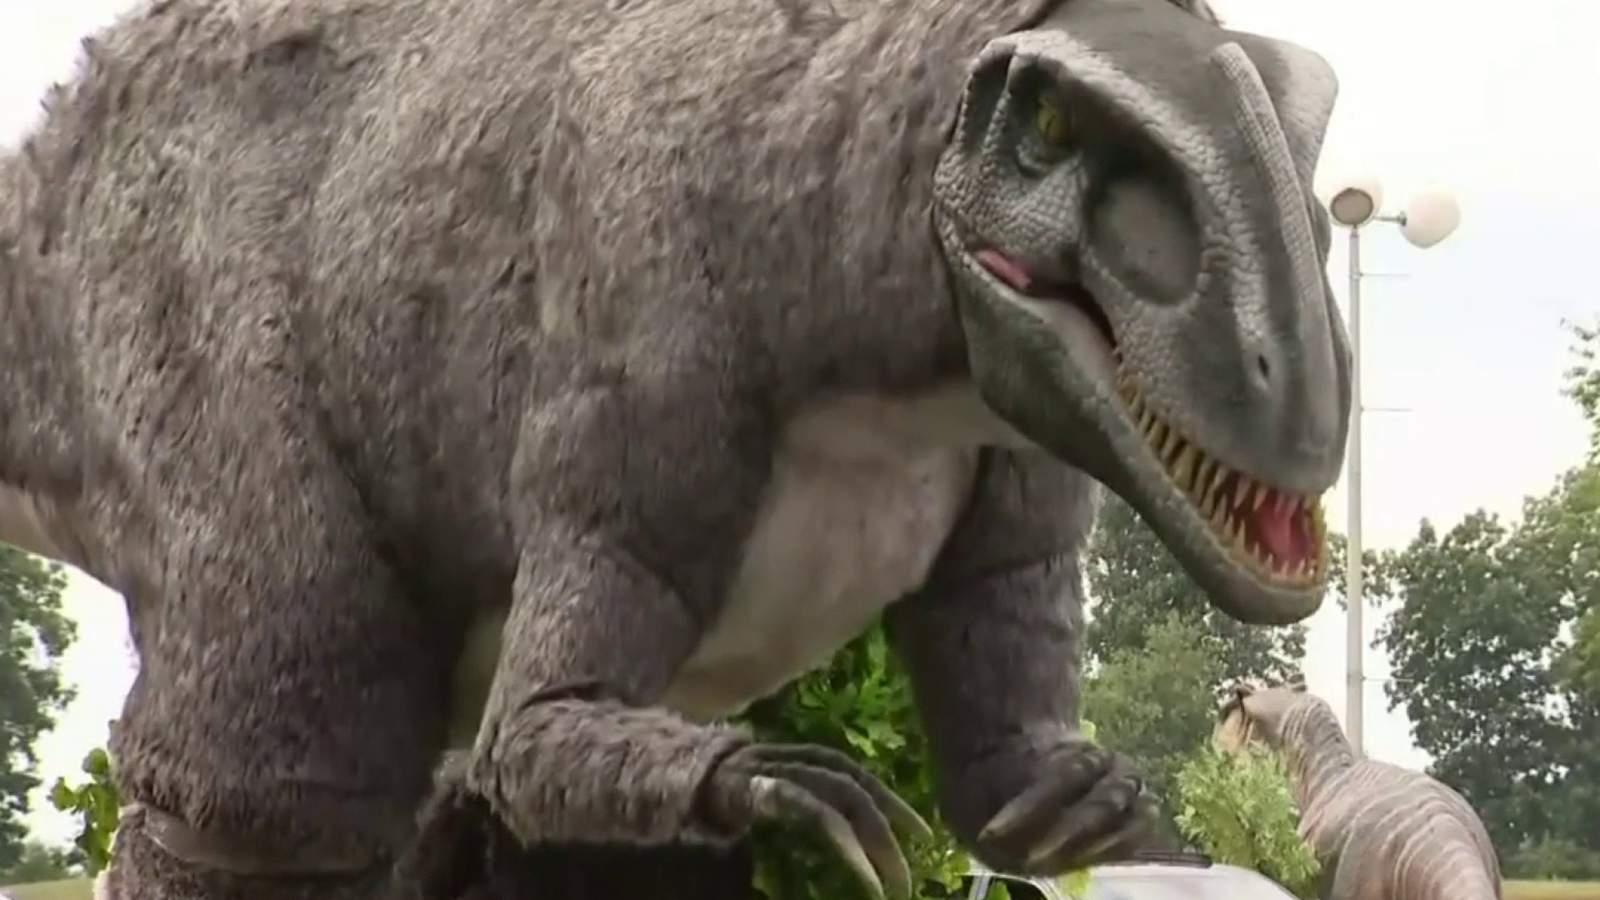 Jurassic Quests drive-thru dinosaur park is open to visitors at DTE Energy Music Theatre